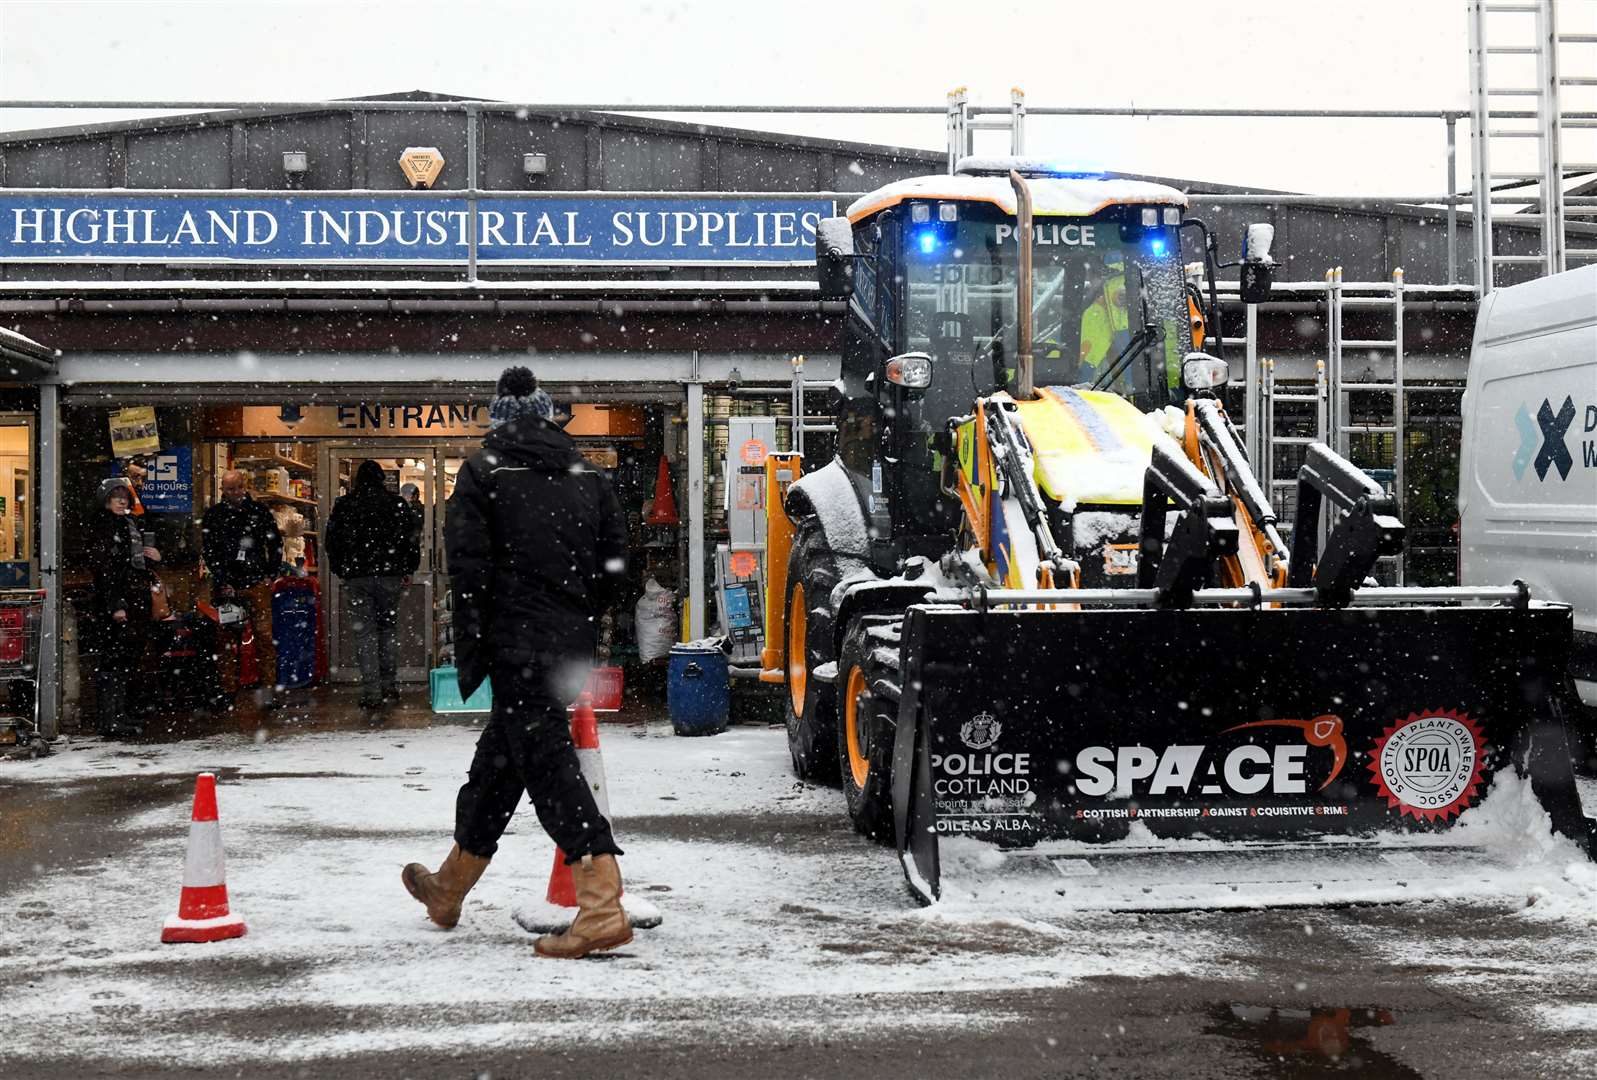 The Police Scotland JCB visits Highland Industrial Supplies in Inverness as part of an awareness-raising campaign. Picture: James Mackenzie.